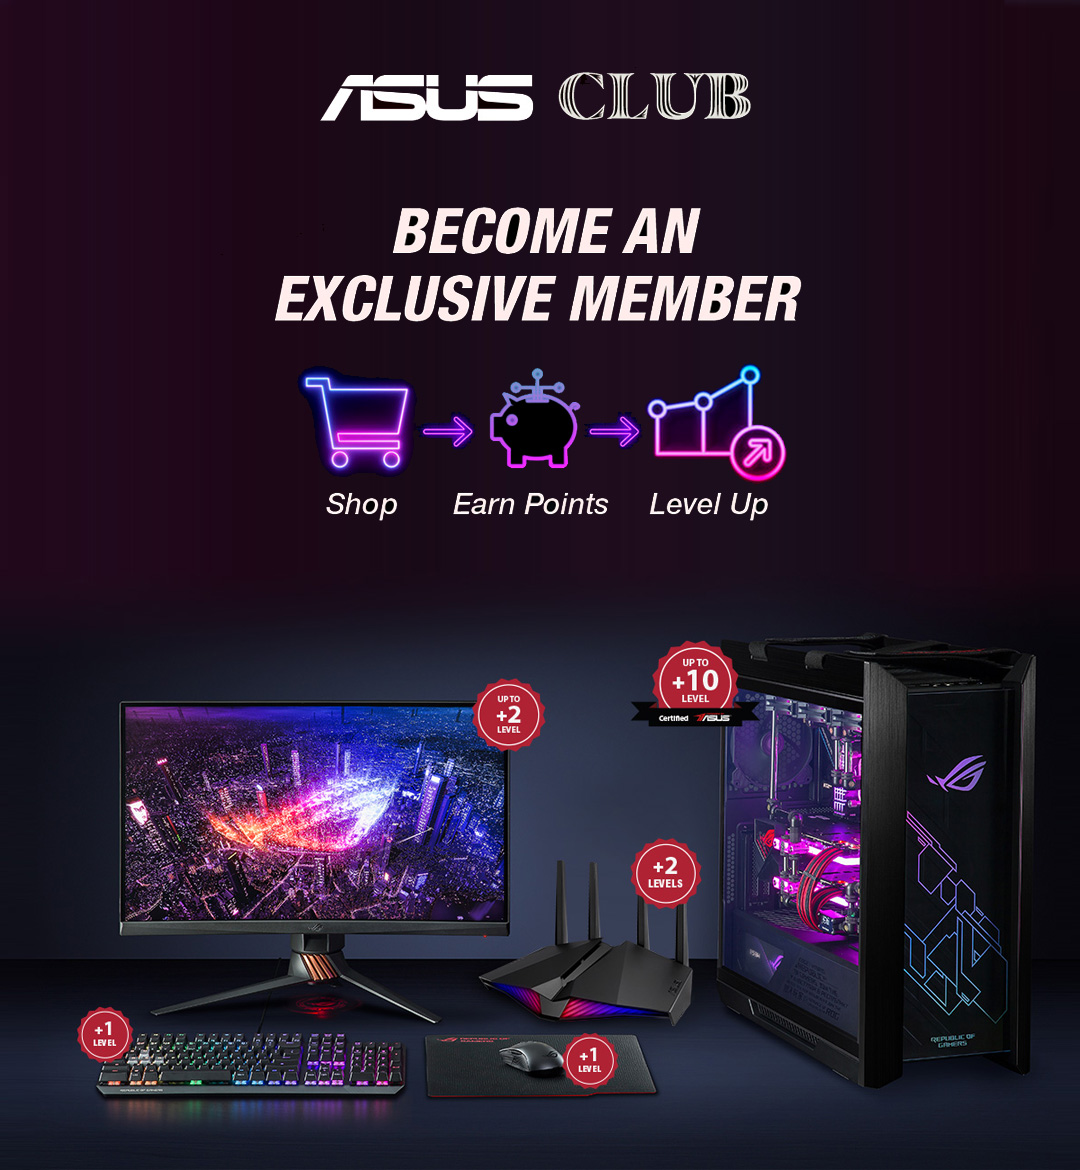 REGISTER YOUR ASUS PRODUCTS AND LEVEL UP